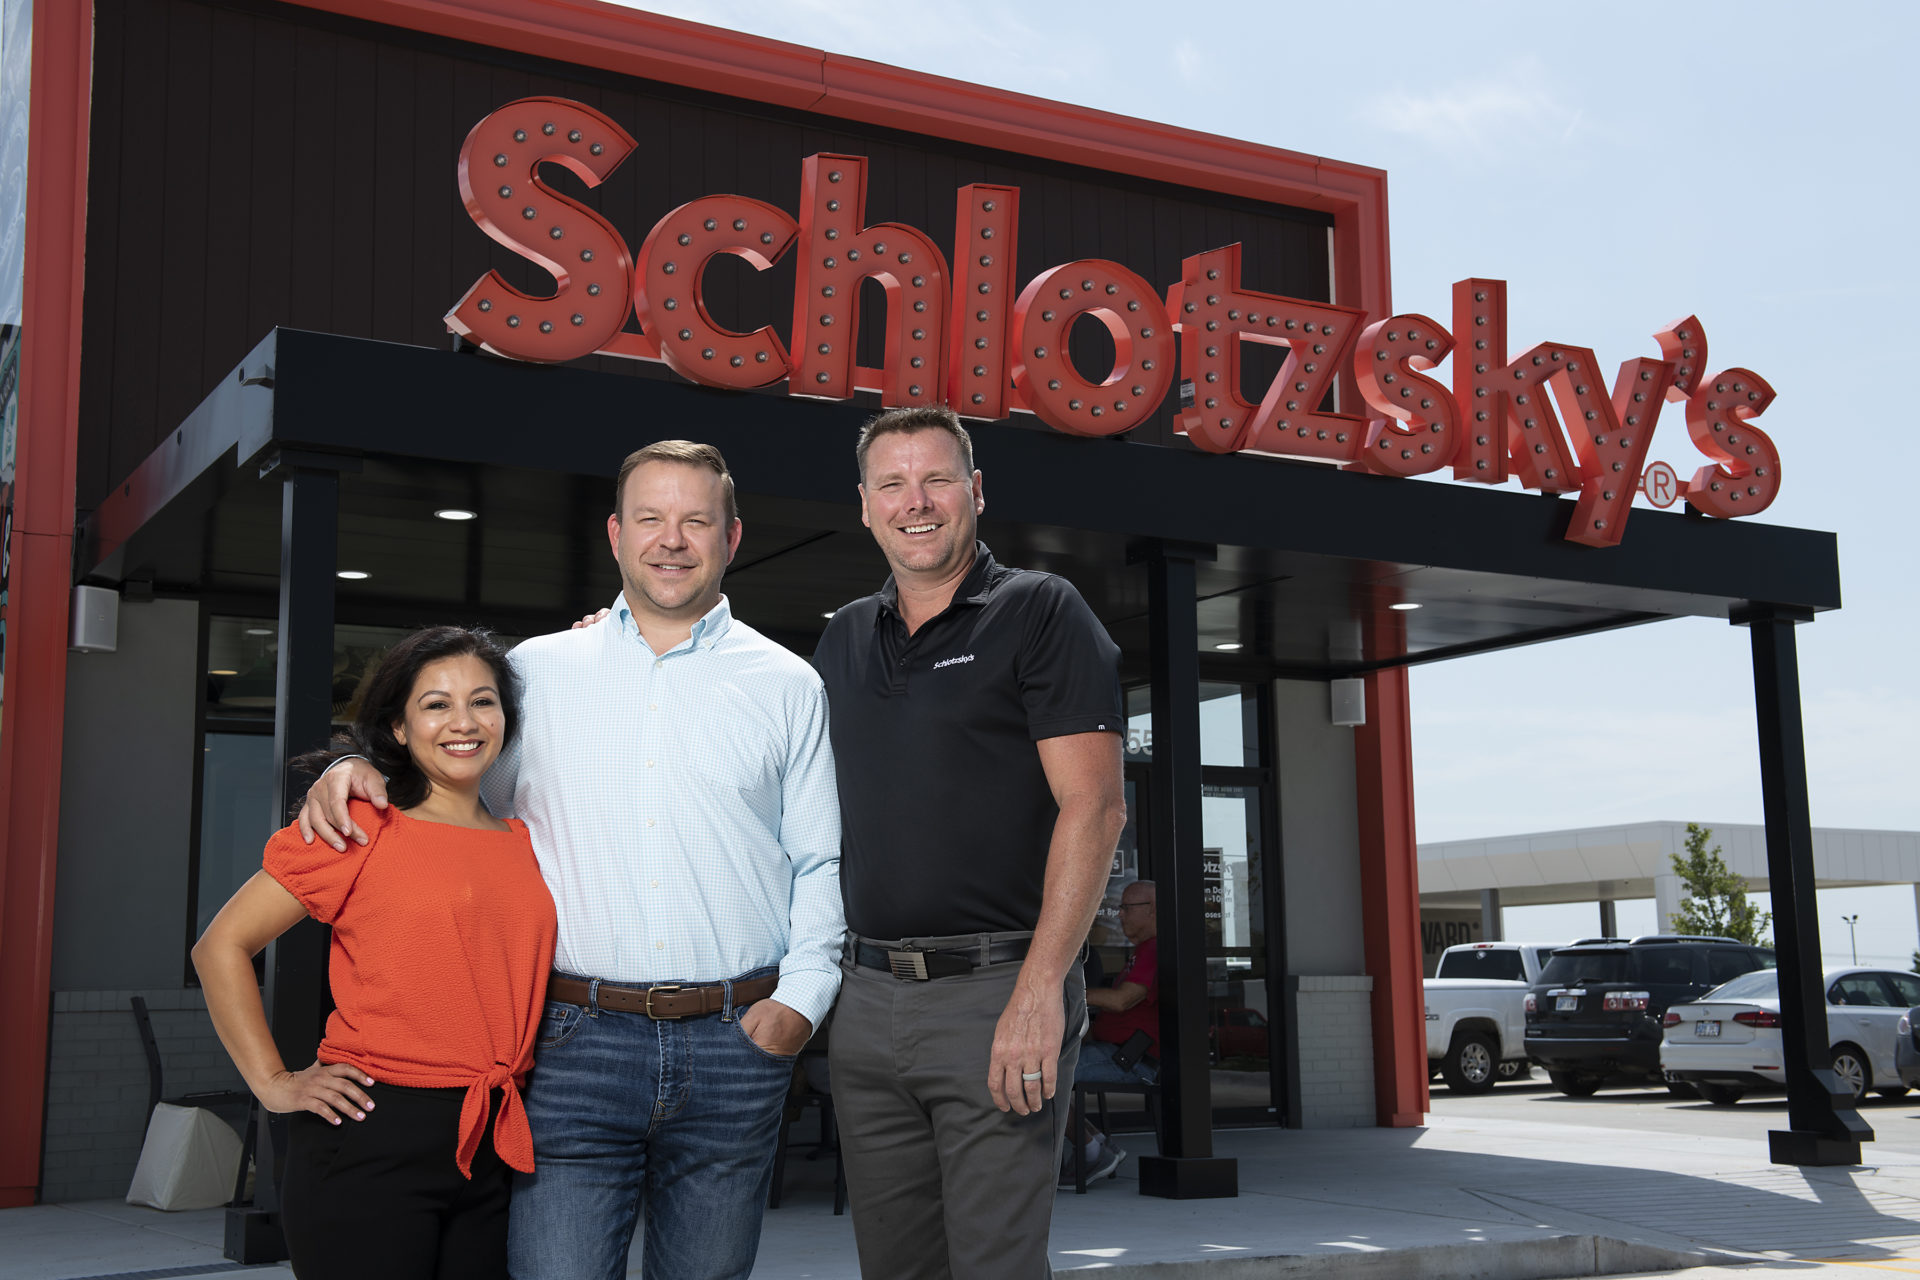 Three people standing in front of a Schlotzsky's establishment